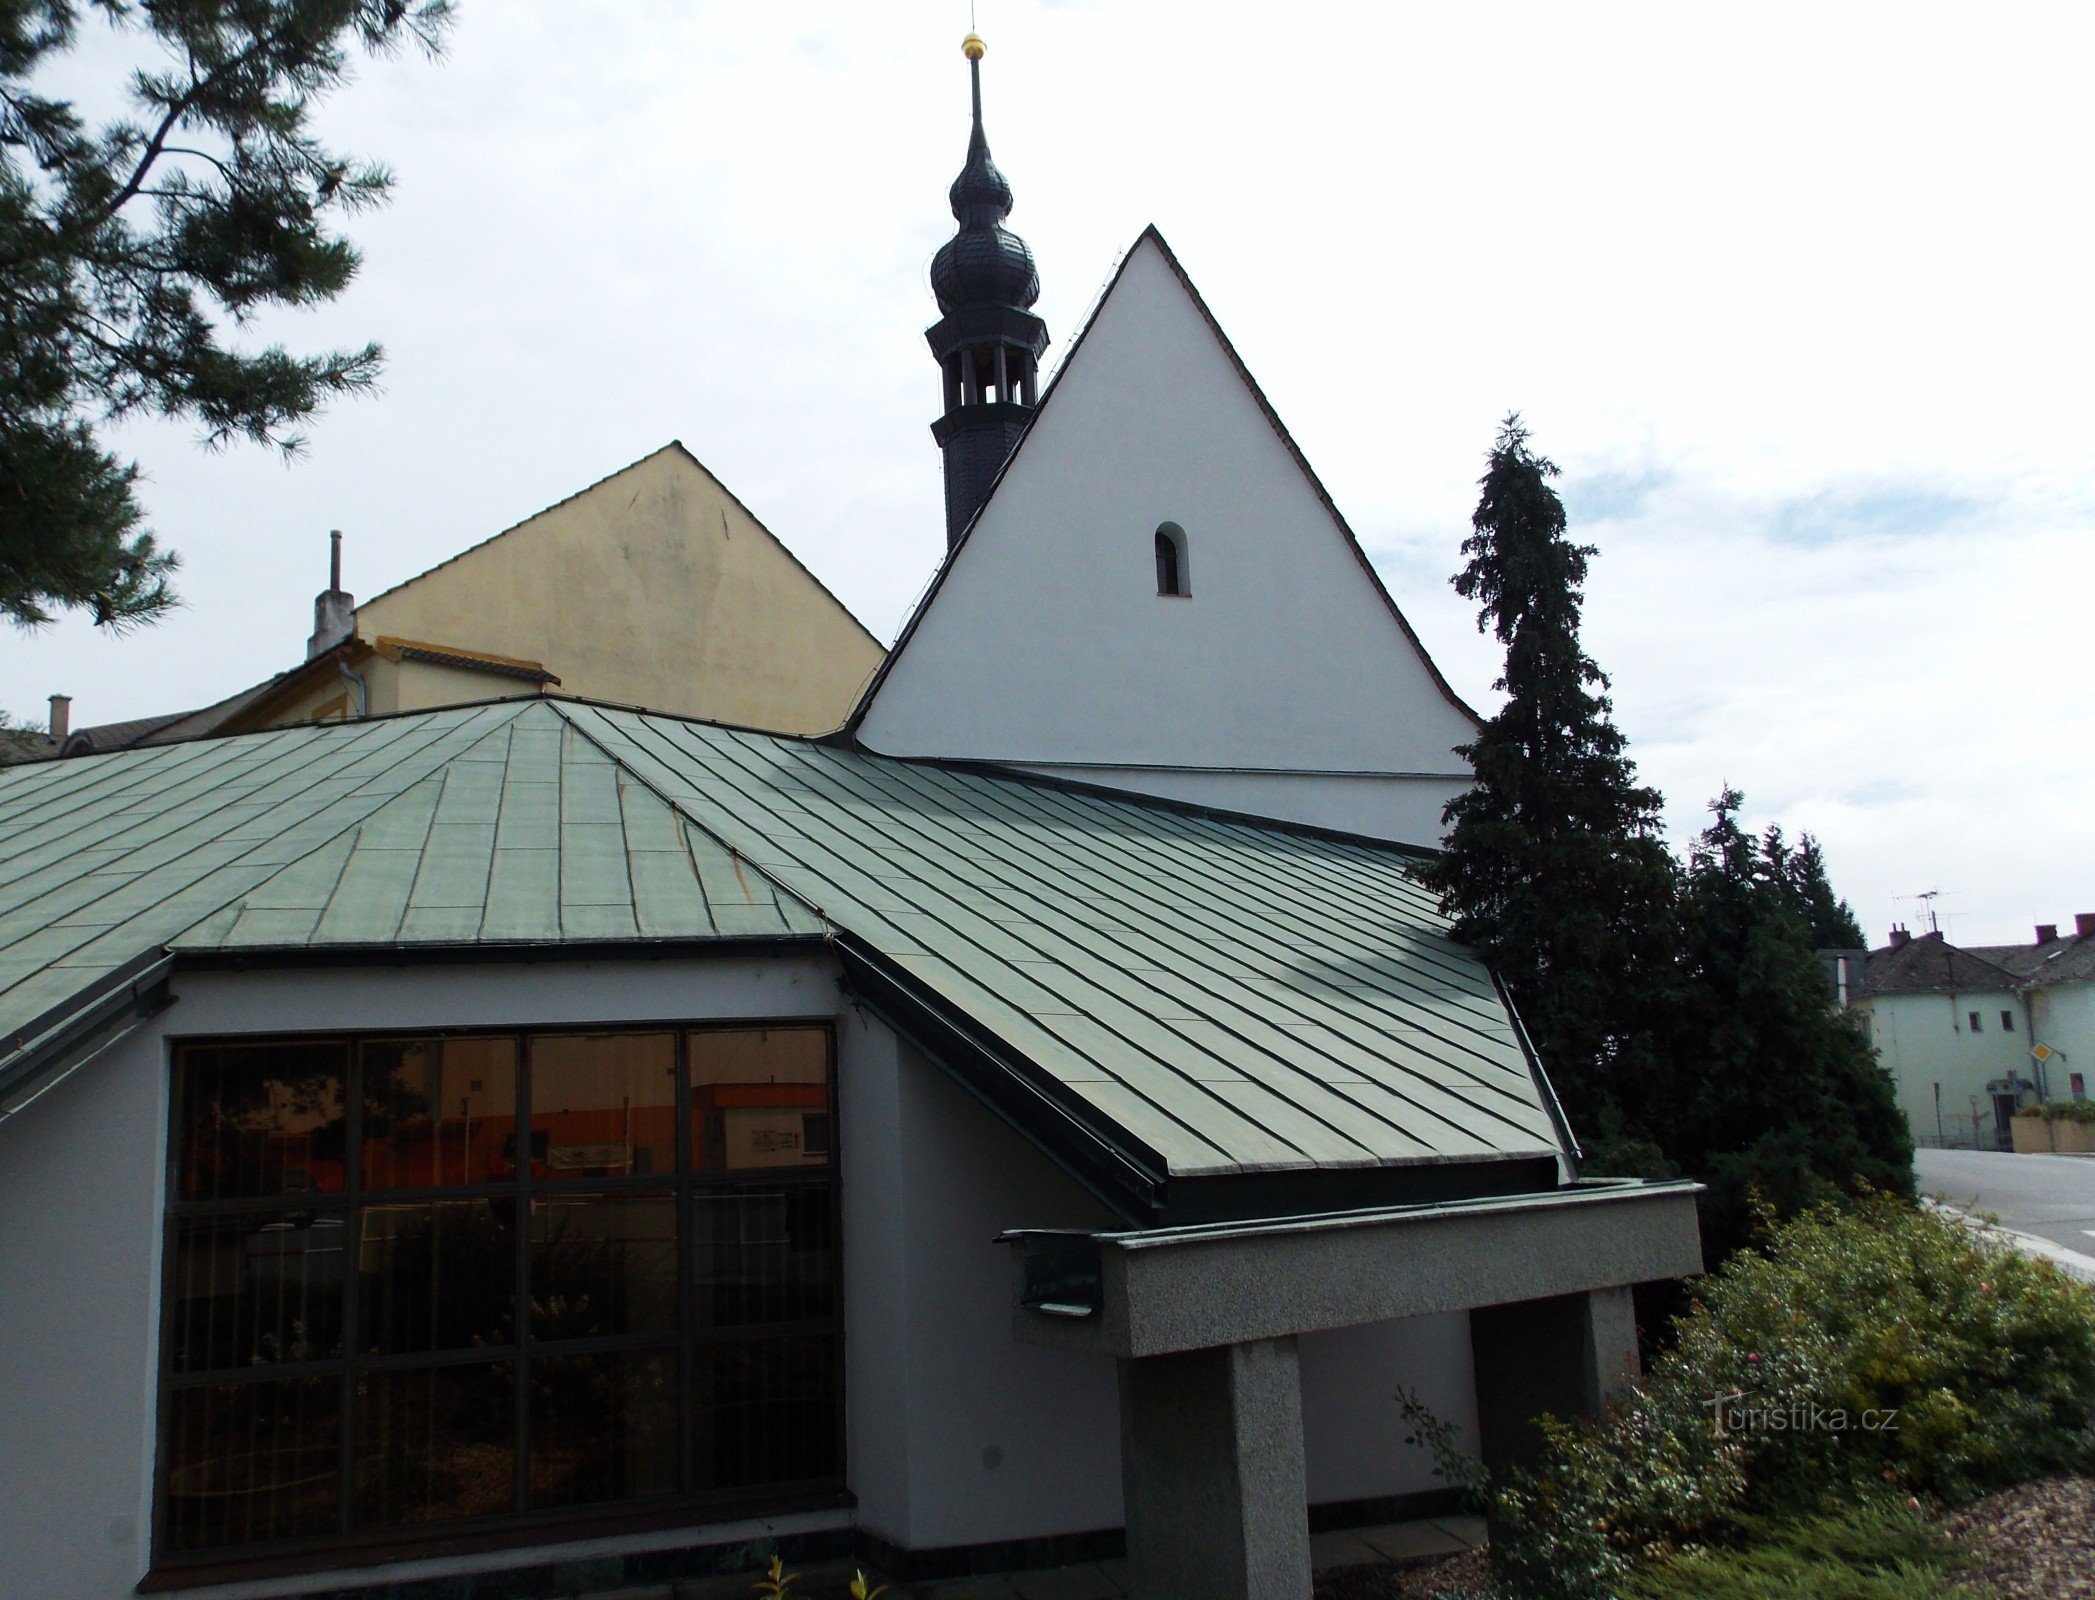 Chapel of St. Barbory ​​in Bílovec